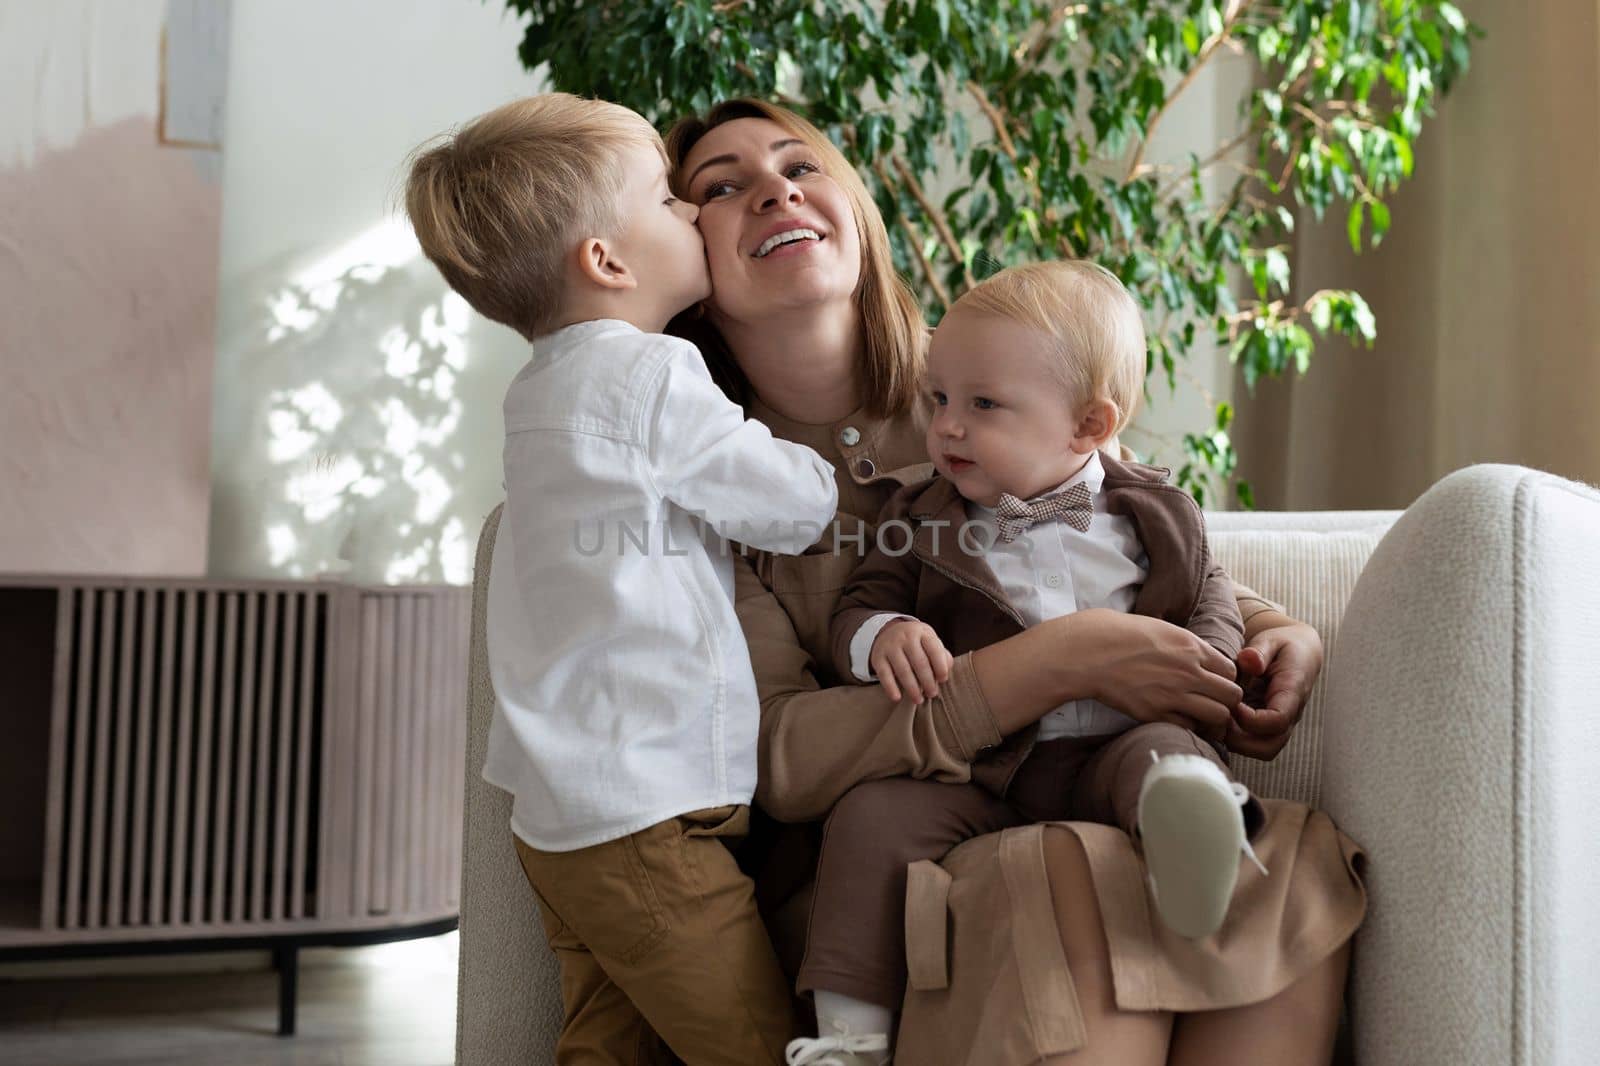 mom with two adorable sons one of whom kisses her on the cheek, mother's day concept.